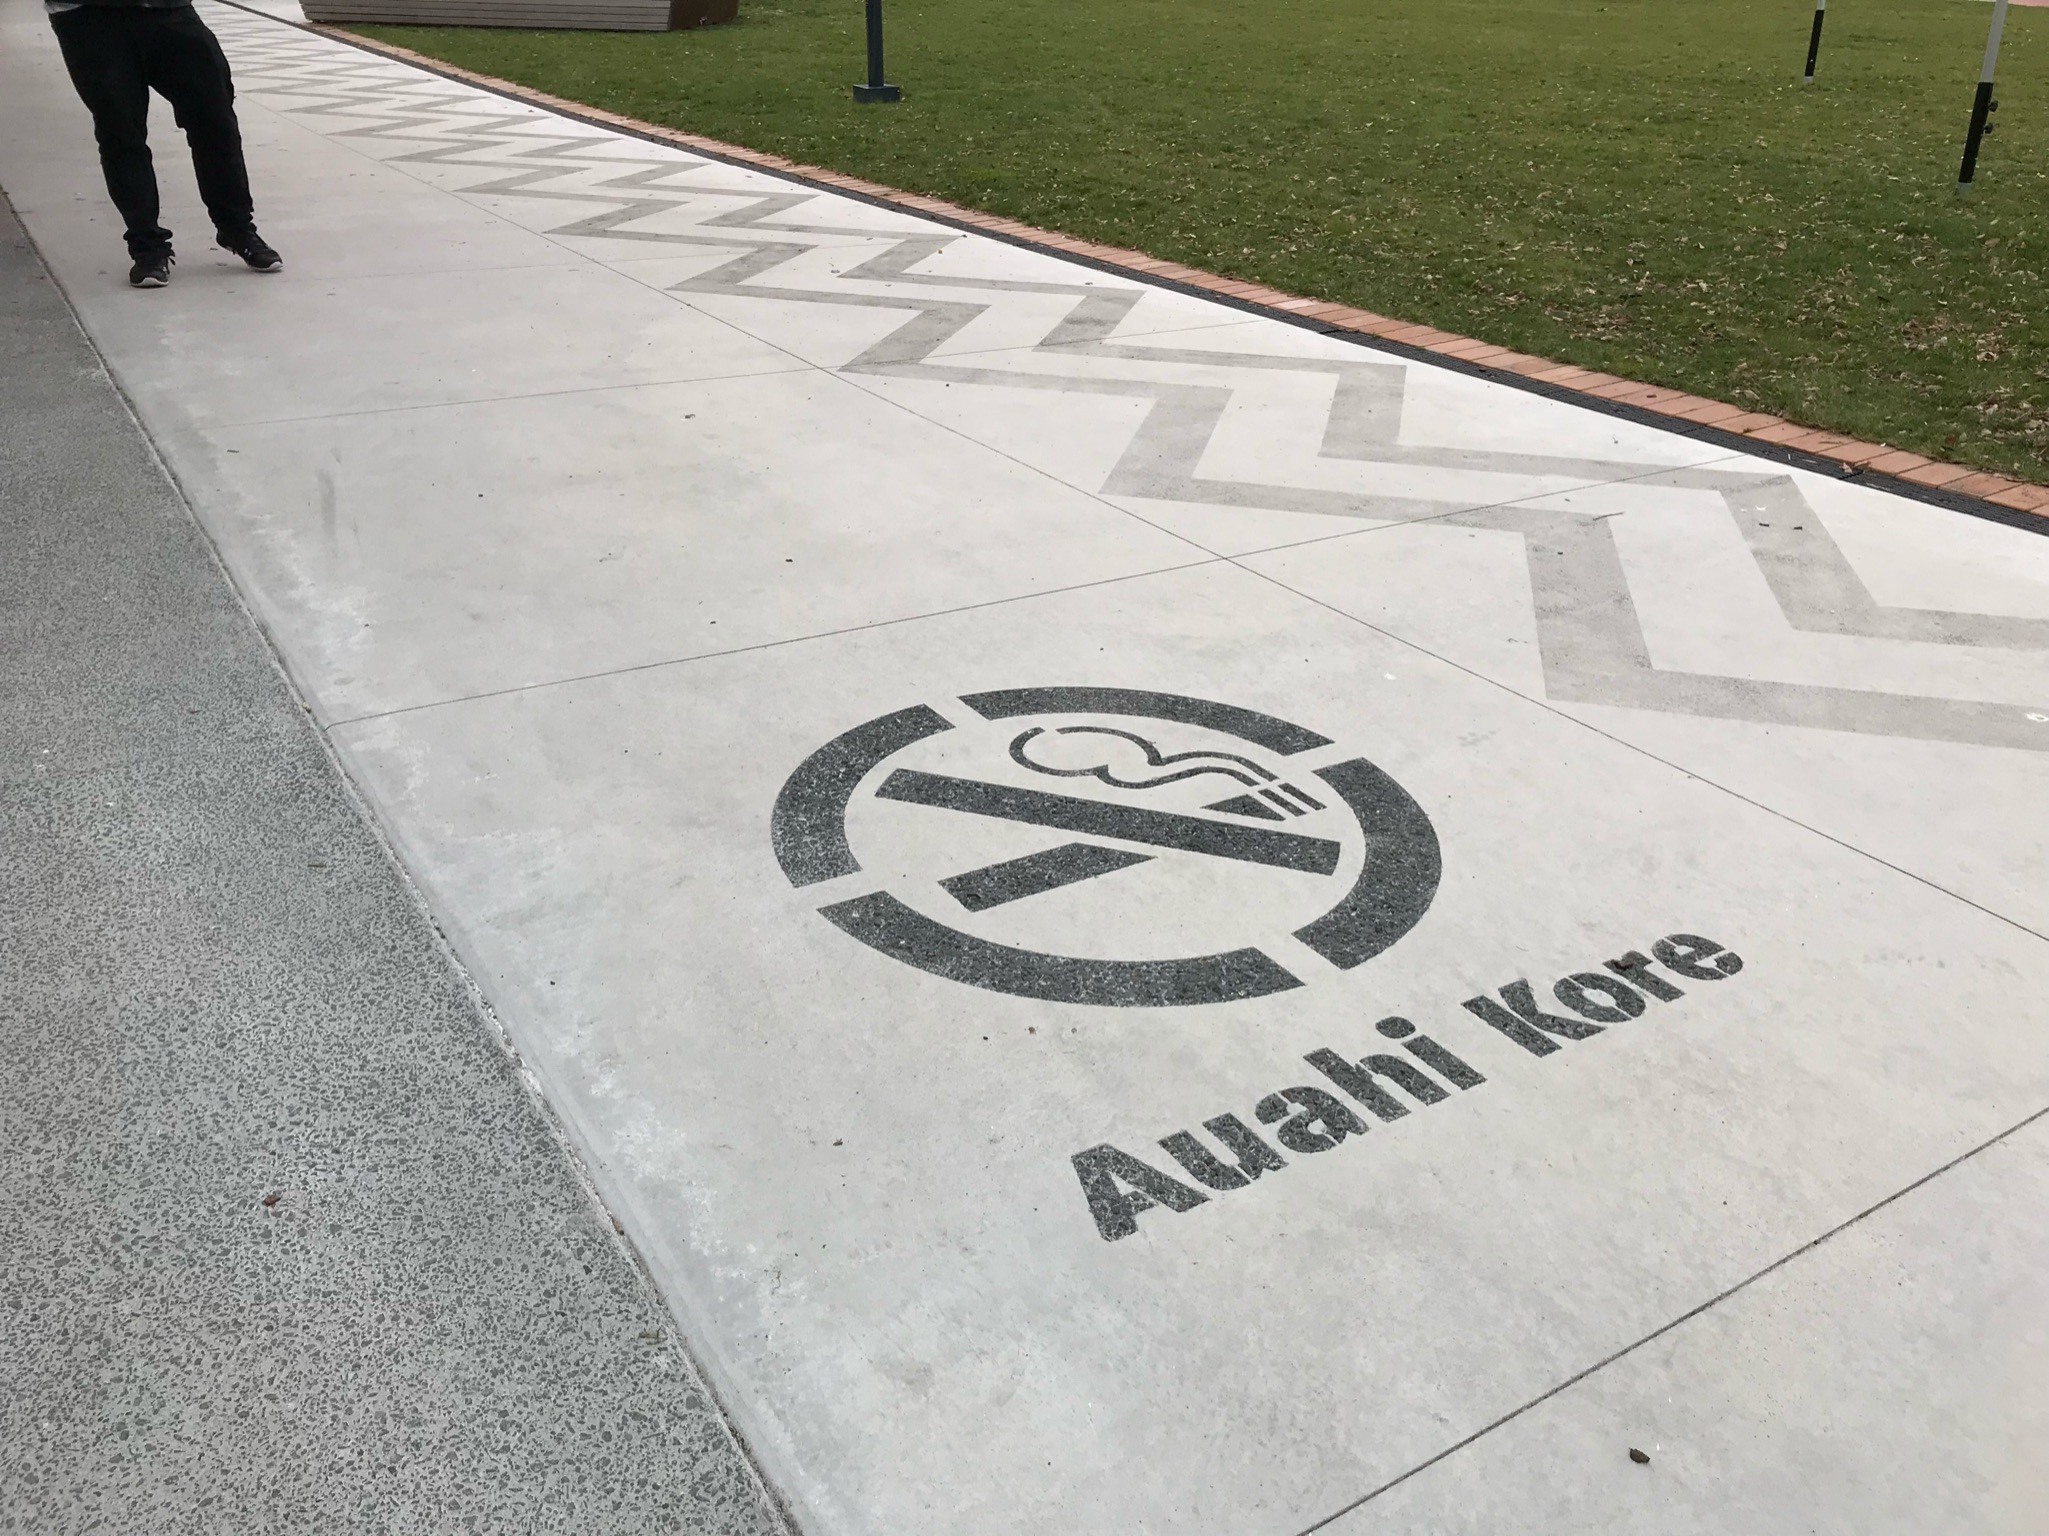 Auahi Kore sign with image of crossed out cigarette engraved into footpath